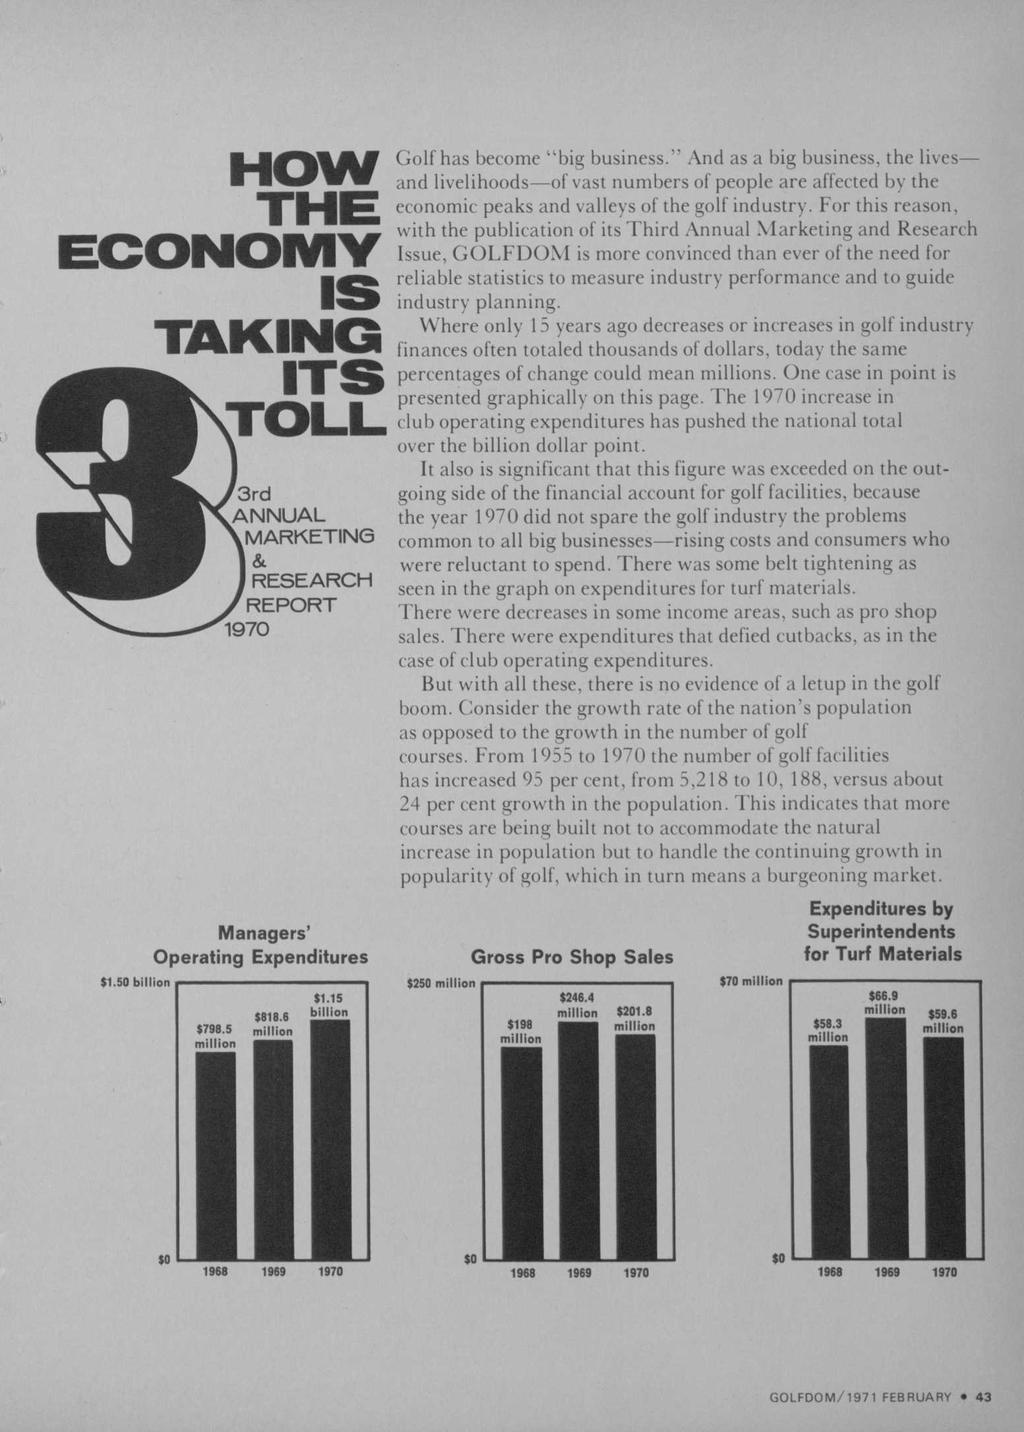 HOW ECONOMY TAKING Î 4 TOLL 3rd ANNUAL MARKETING & RESEARCH REPORT 1970 Golf has become "big business.